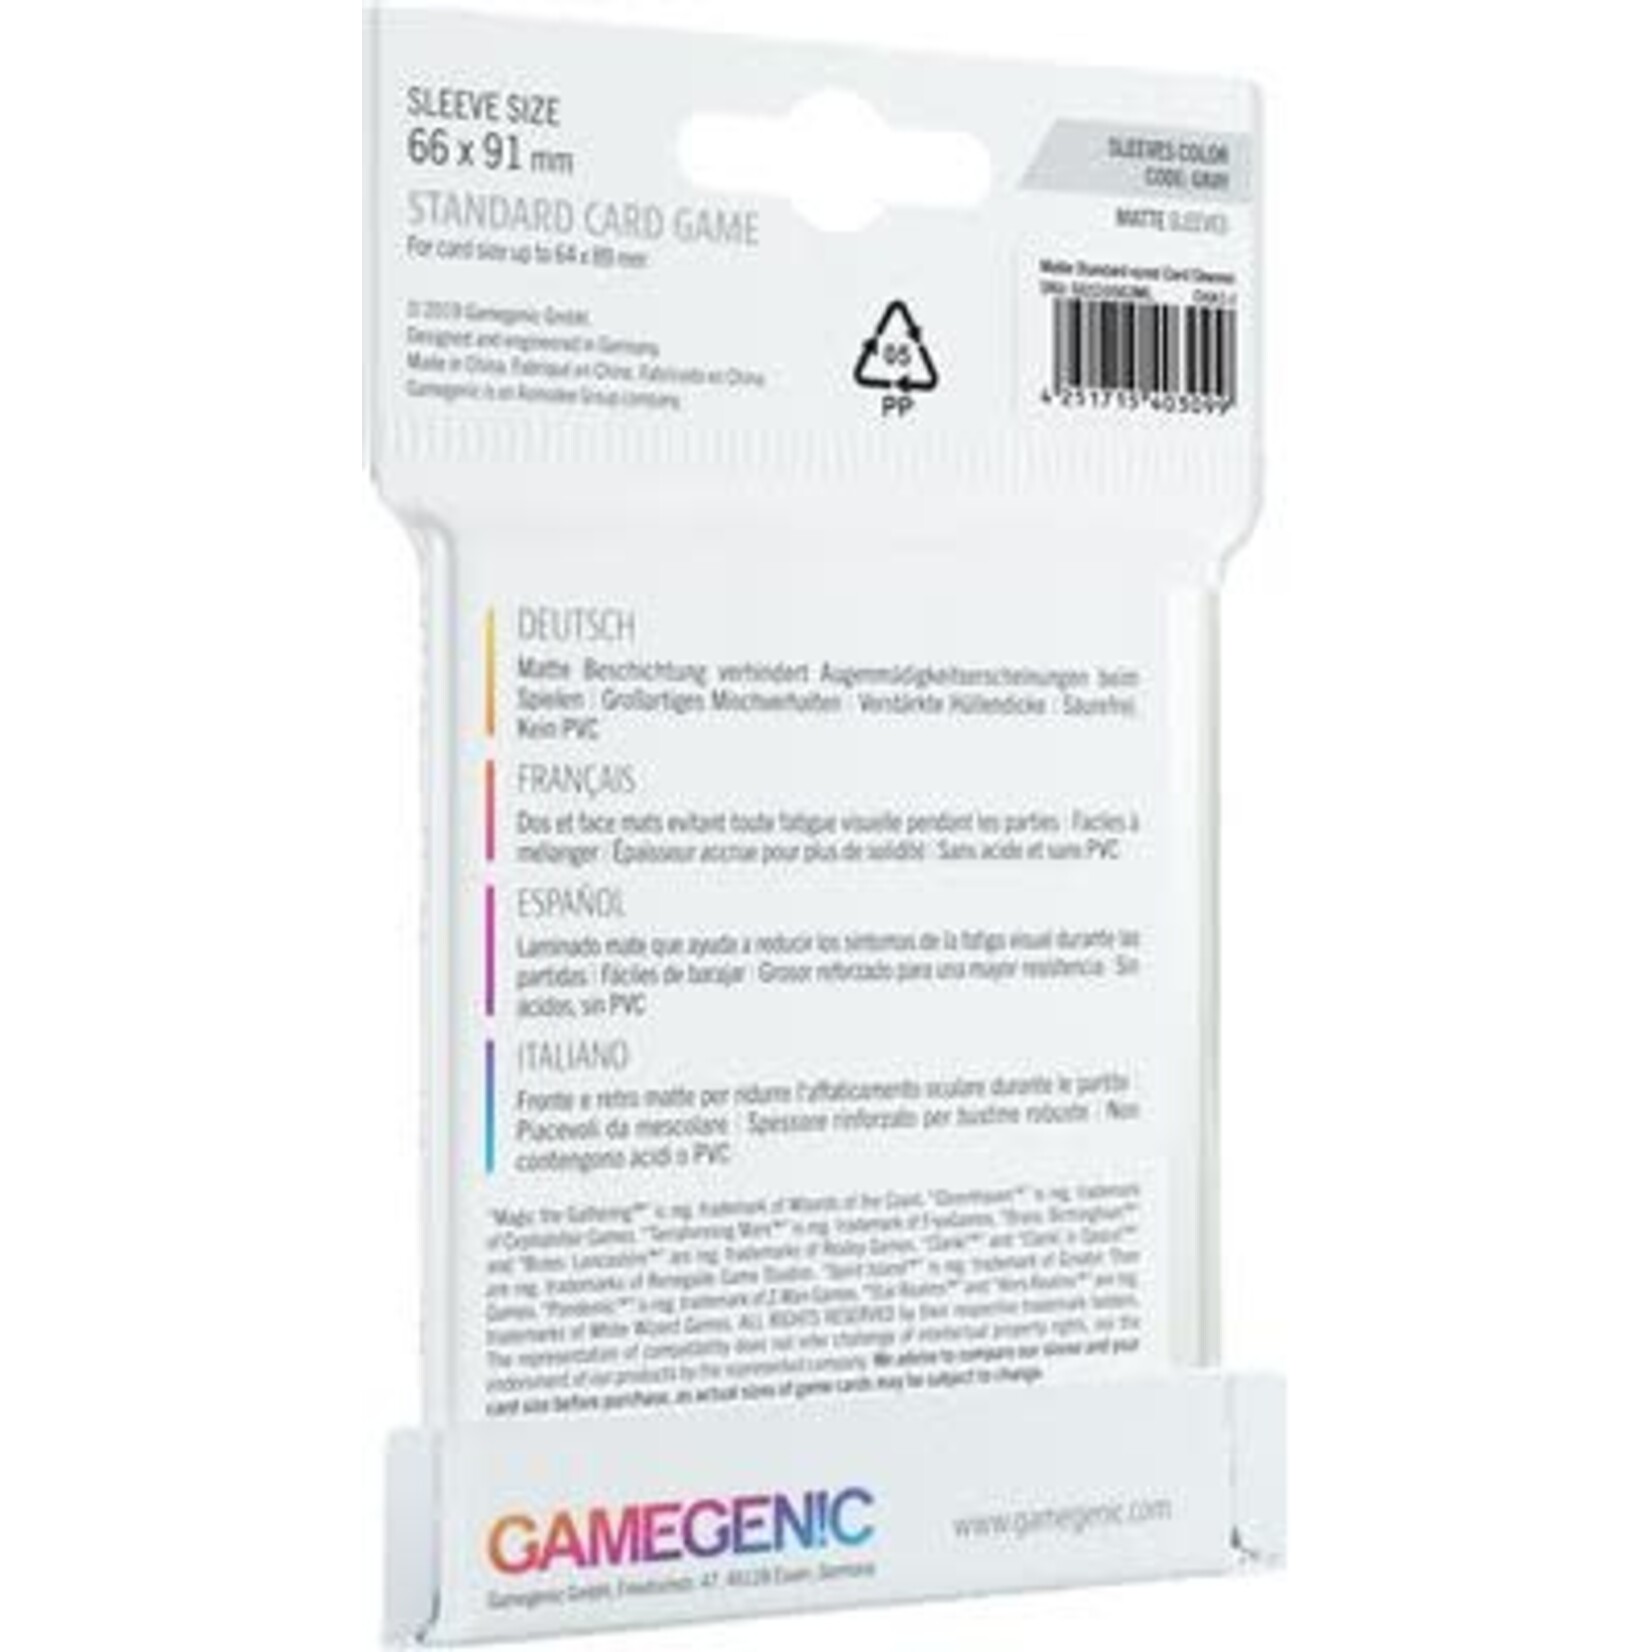 Gamegenic MATTE Sleeves: Standard Card Game (66 x 91 mm)